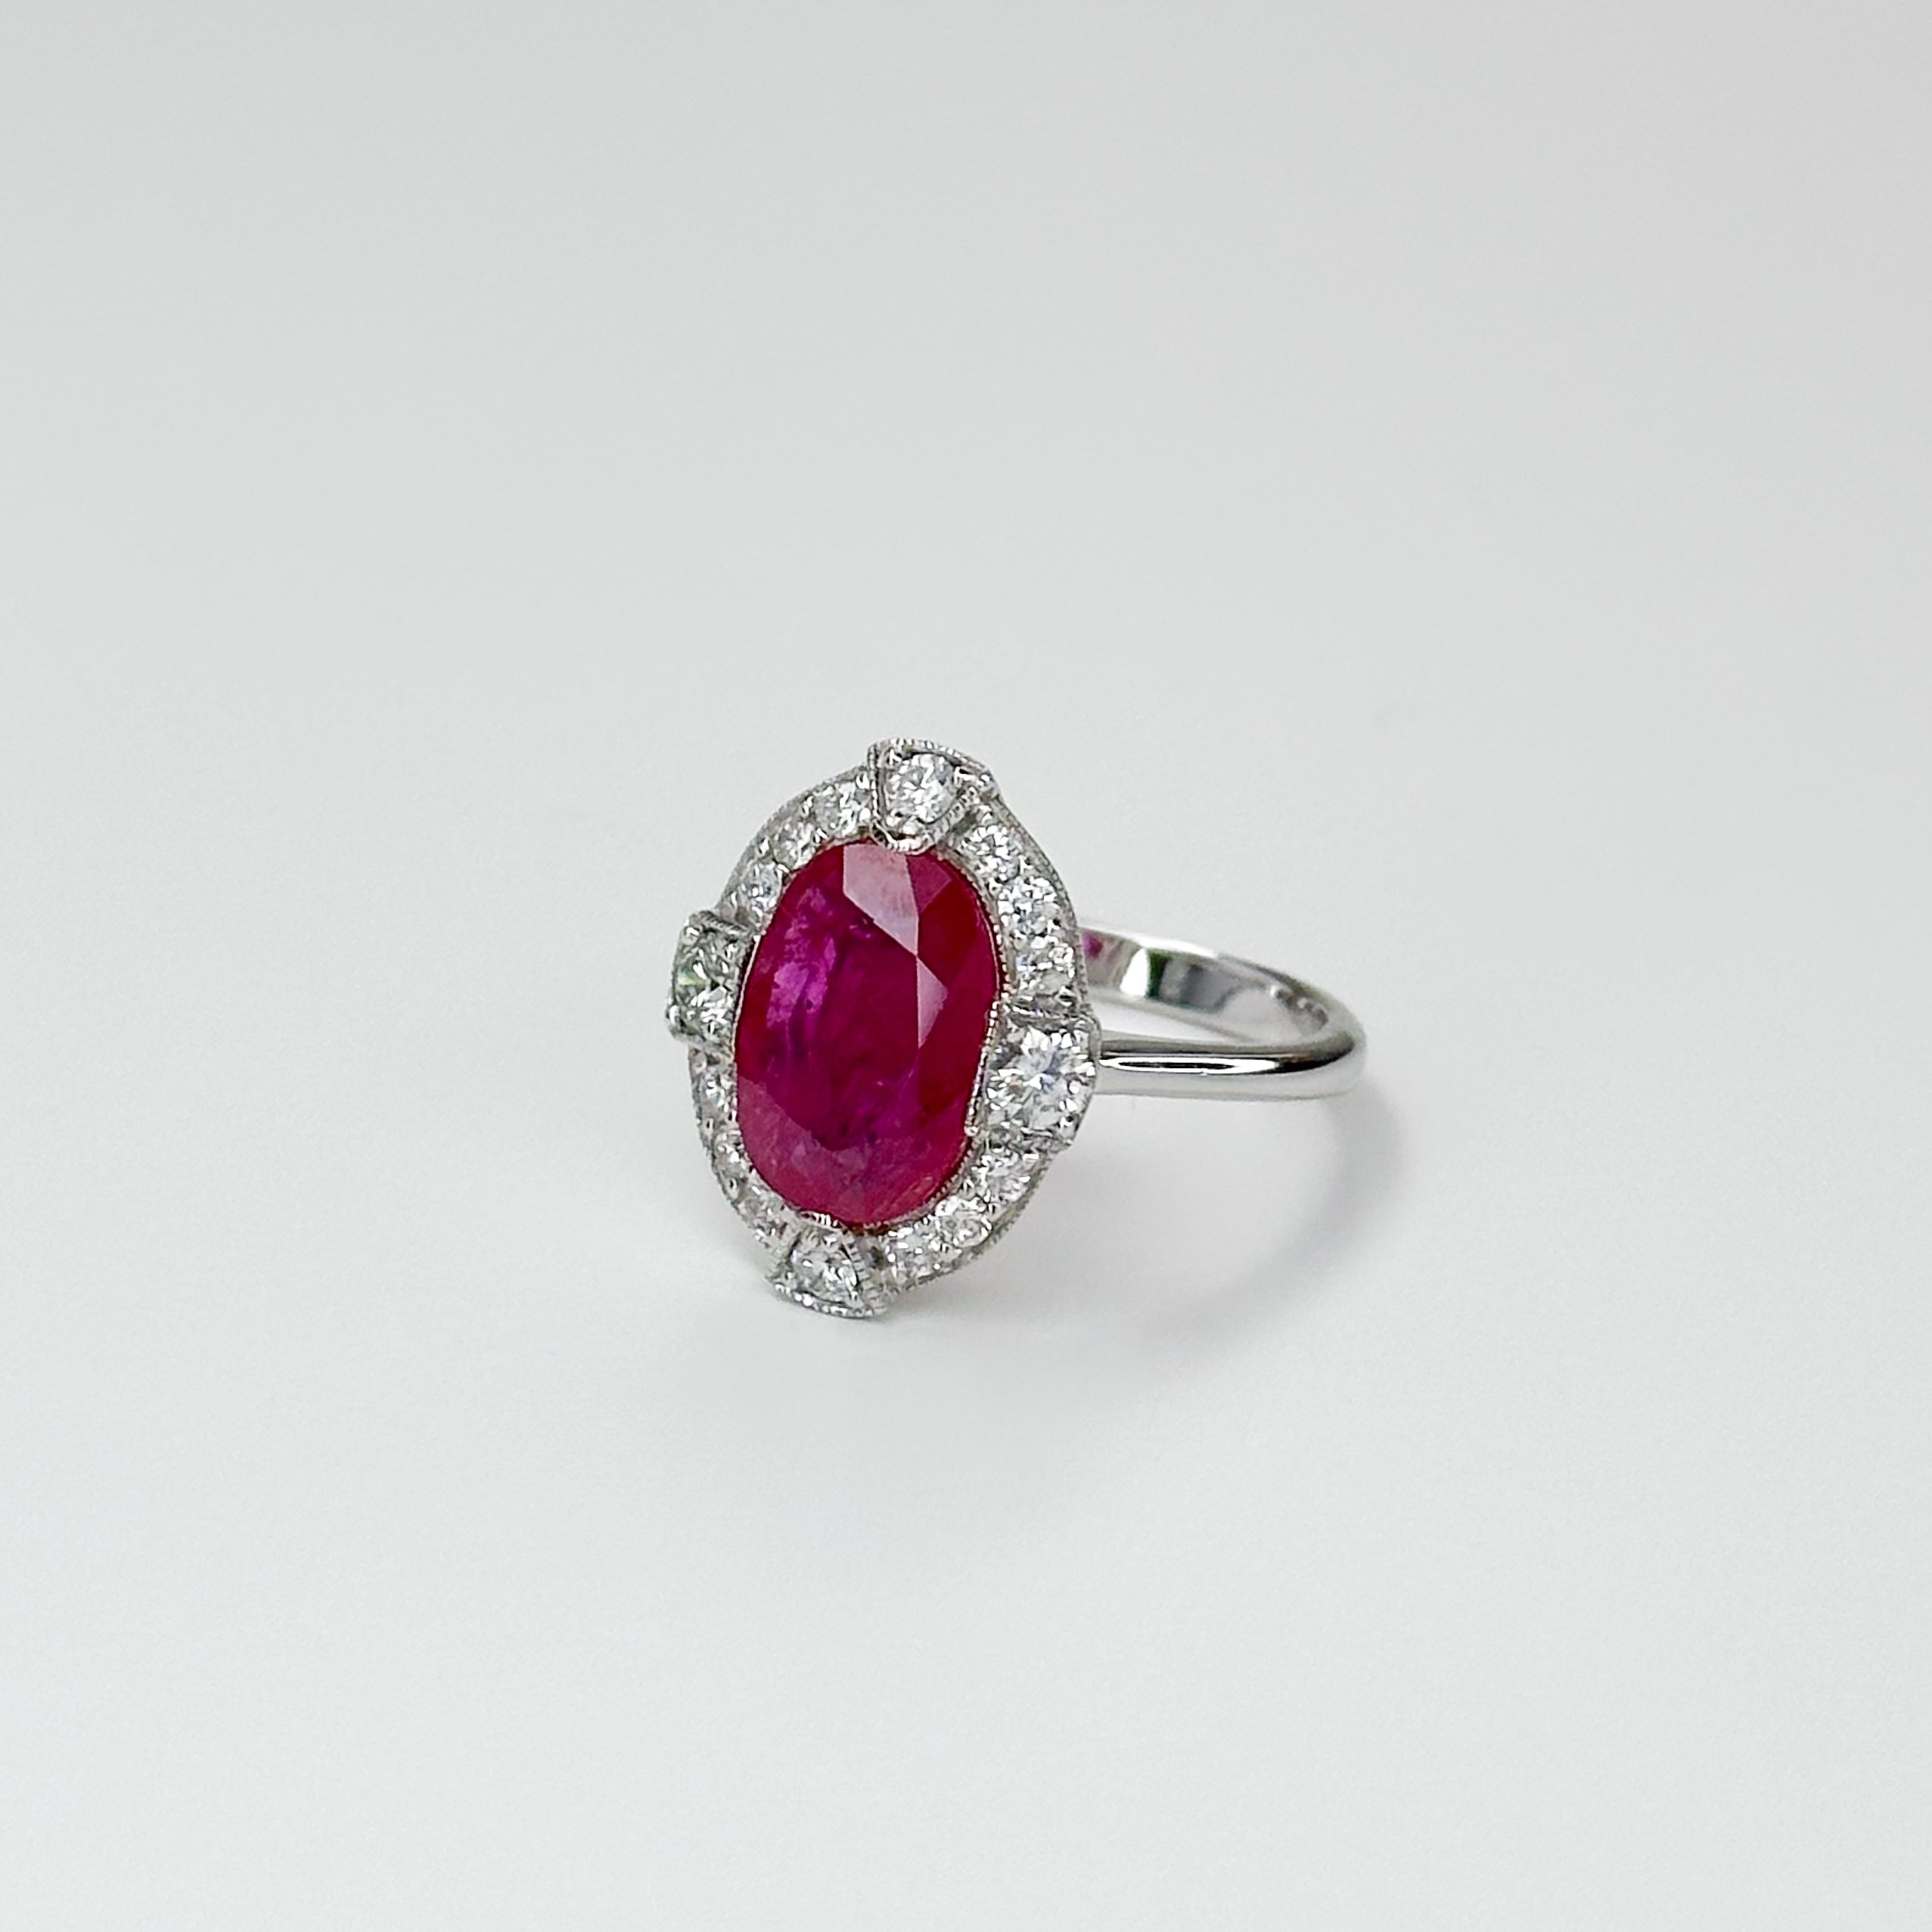 3.23ct Oval Cut Ruby Ring with Diamond Halo